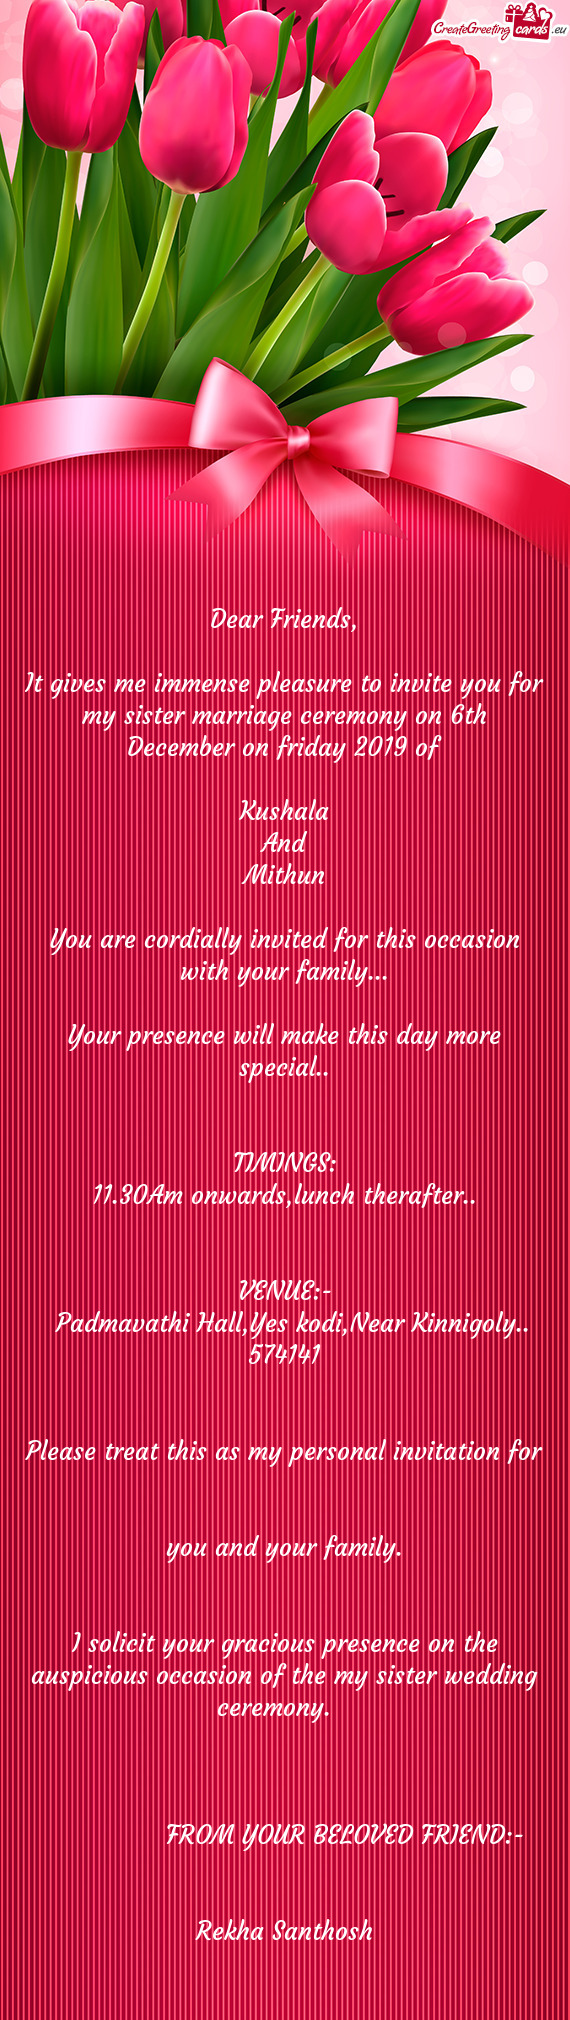 It gives me immense pleasure to invite you for my sister marriage ceremony on 6th December on fr